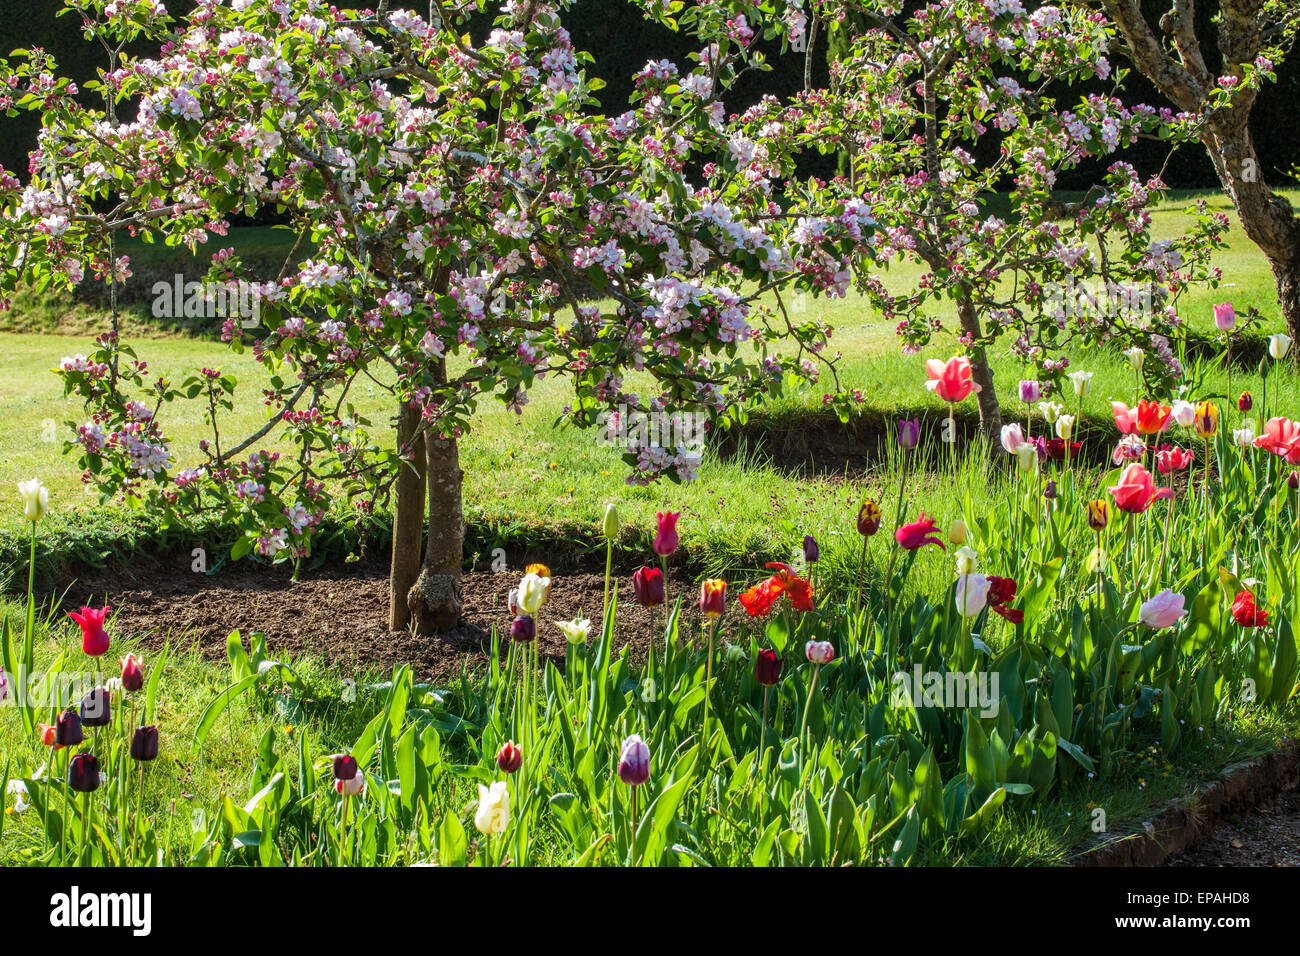 Tulips beneath blossoming apples trees in the wallled garden at Bowood House in Wiltshire. Stock Photo